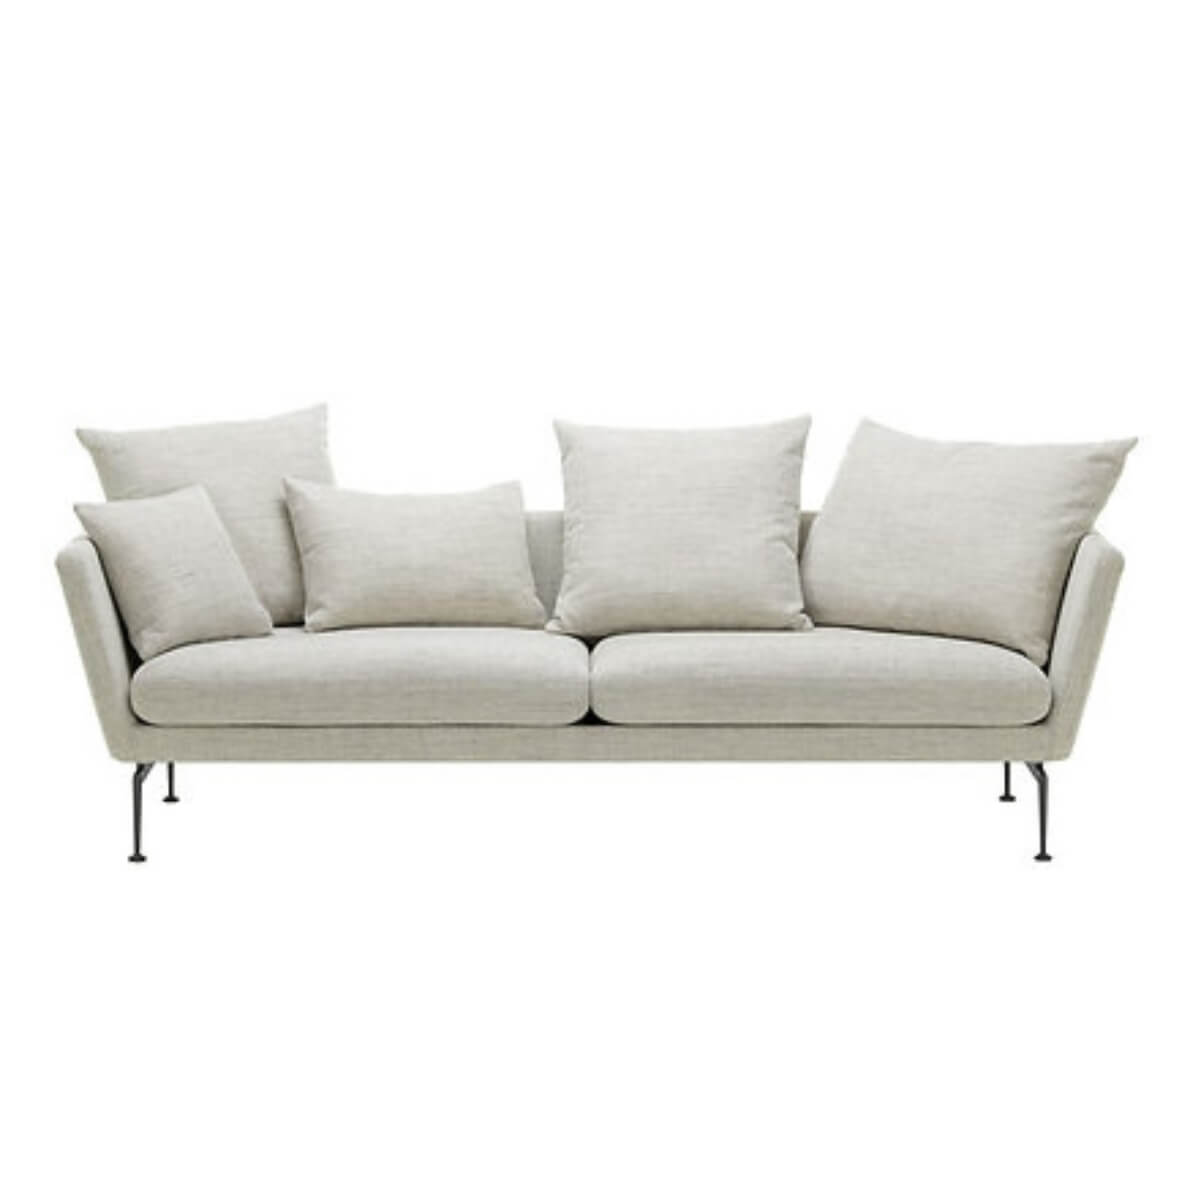 Aurora Alcove Cotton Linen Sofa - A Serene Oasis of Comfort and Style